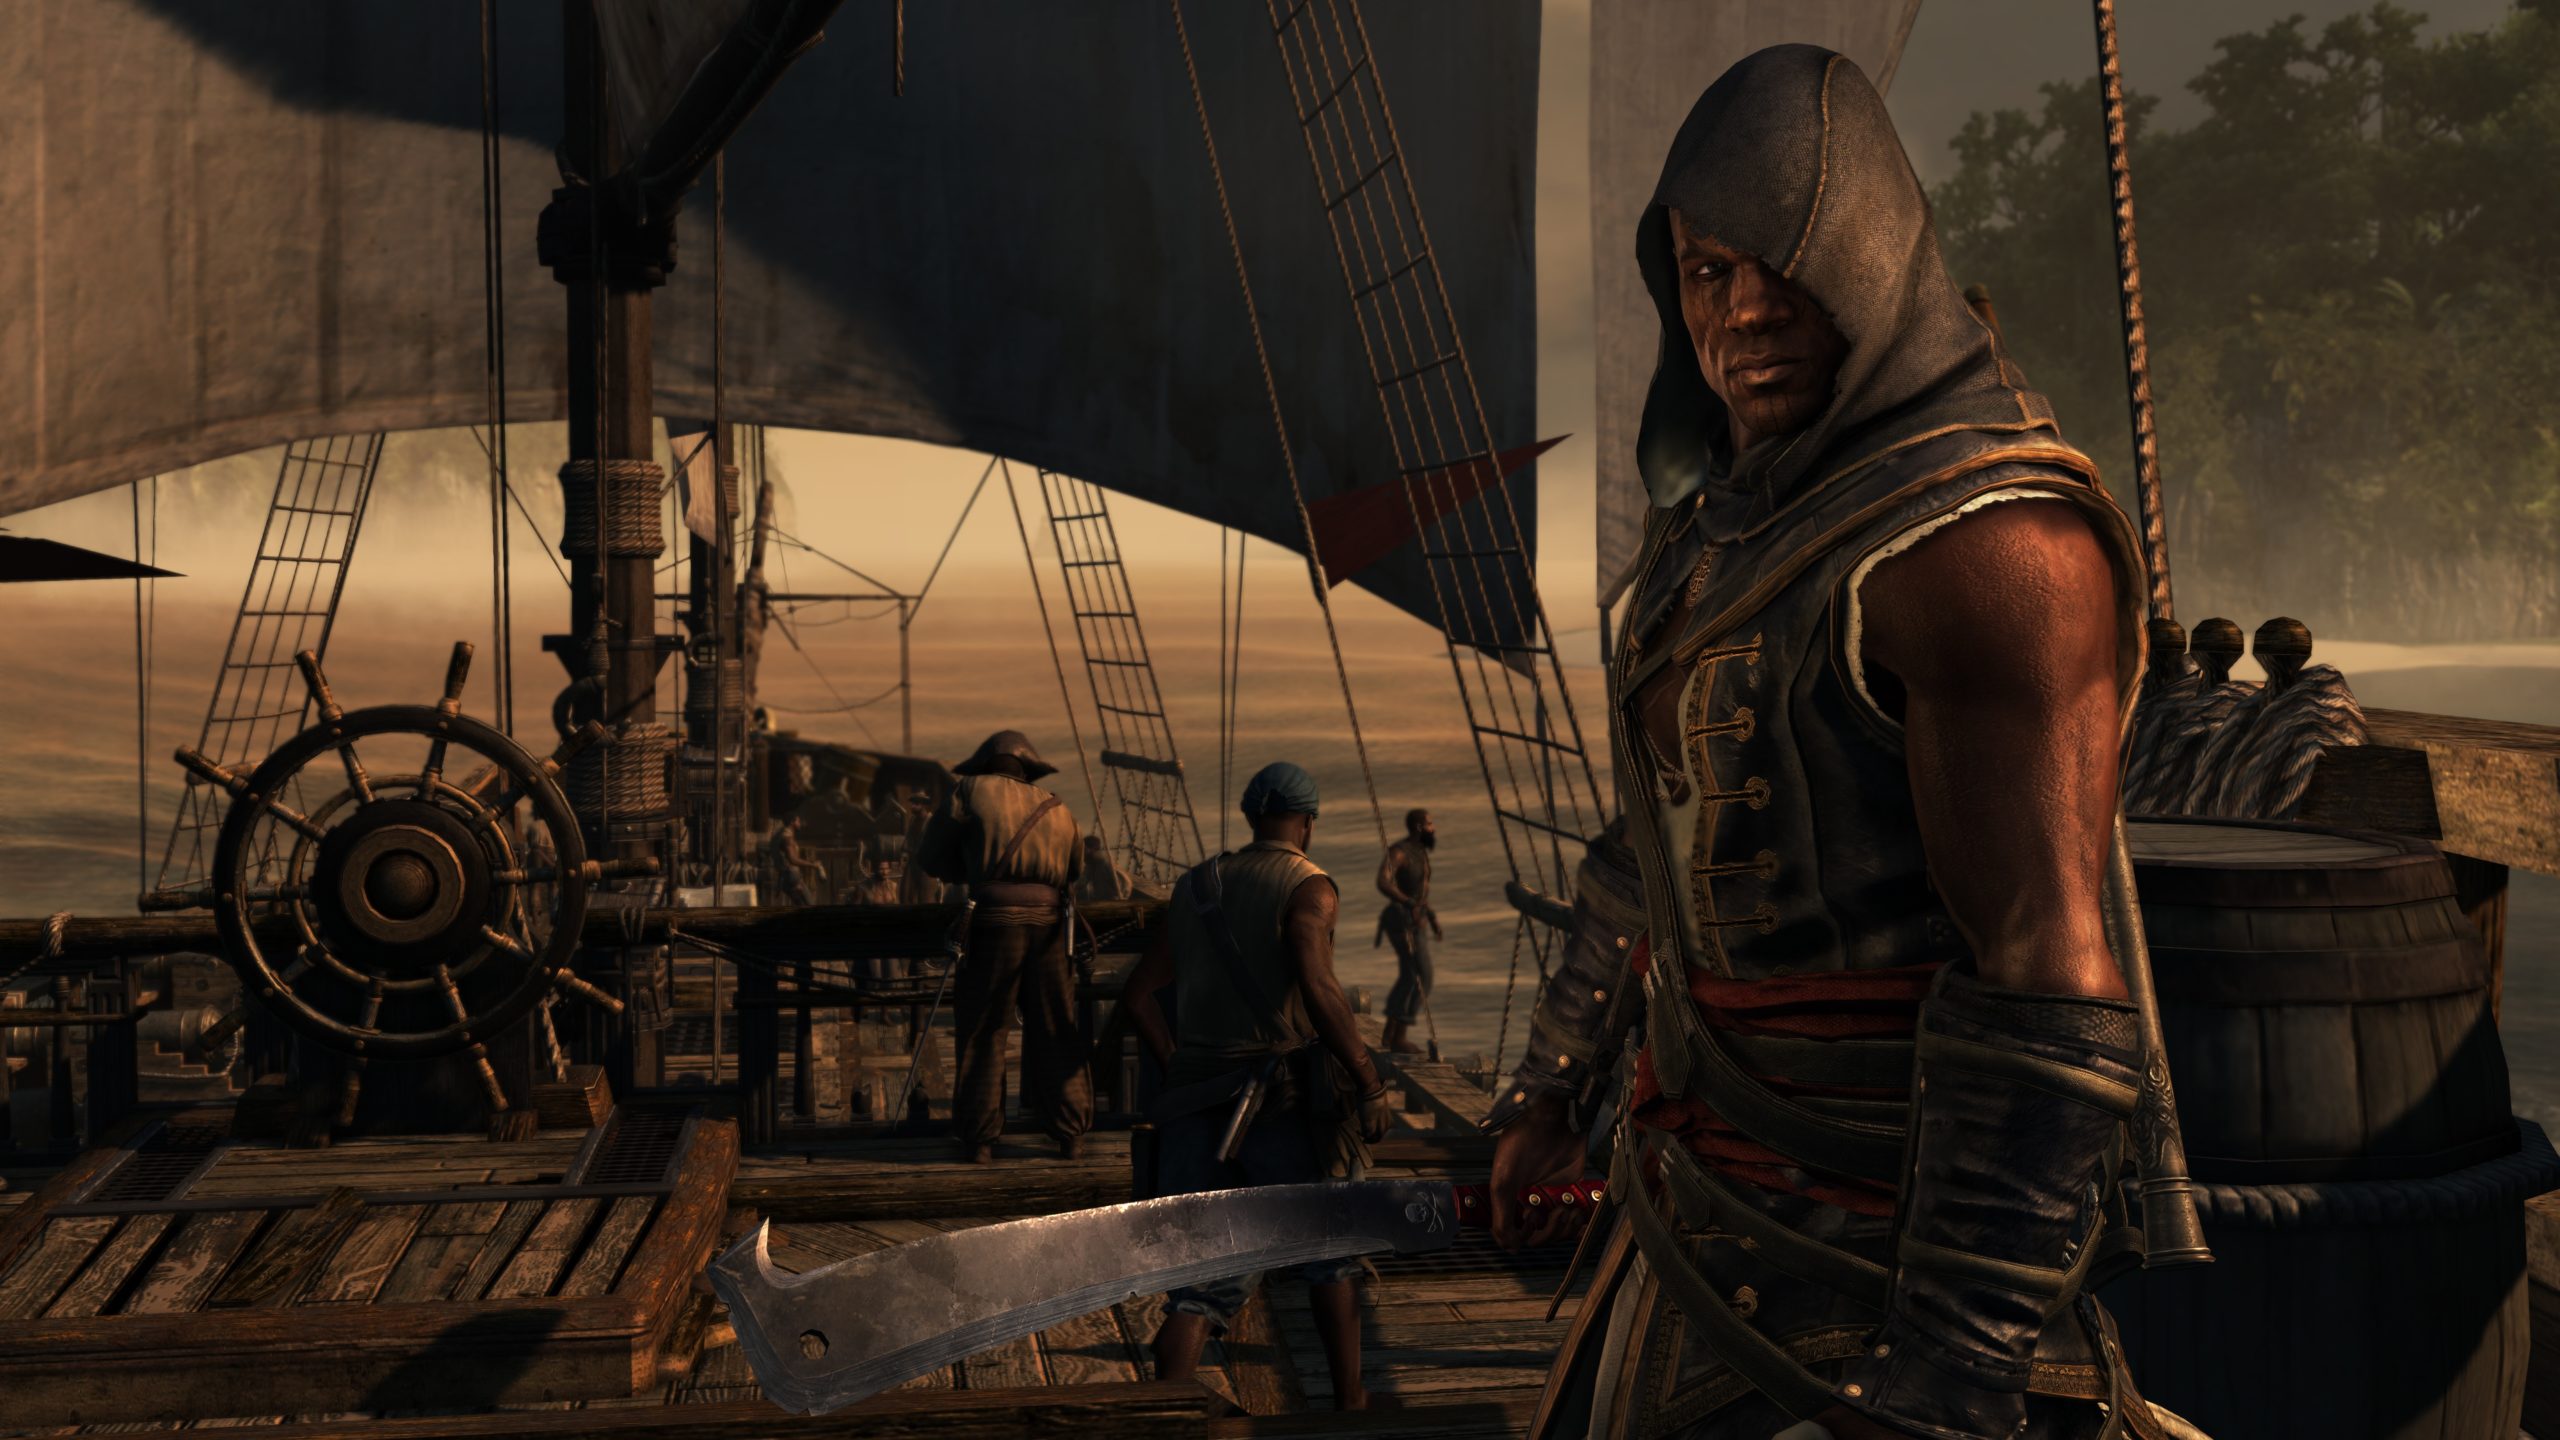 You’re An Escaped Slave In Assassin’s Creed IV’s Freedom’s Cry DLC